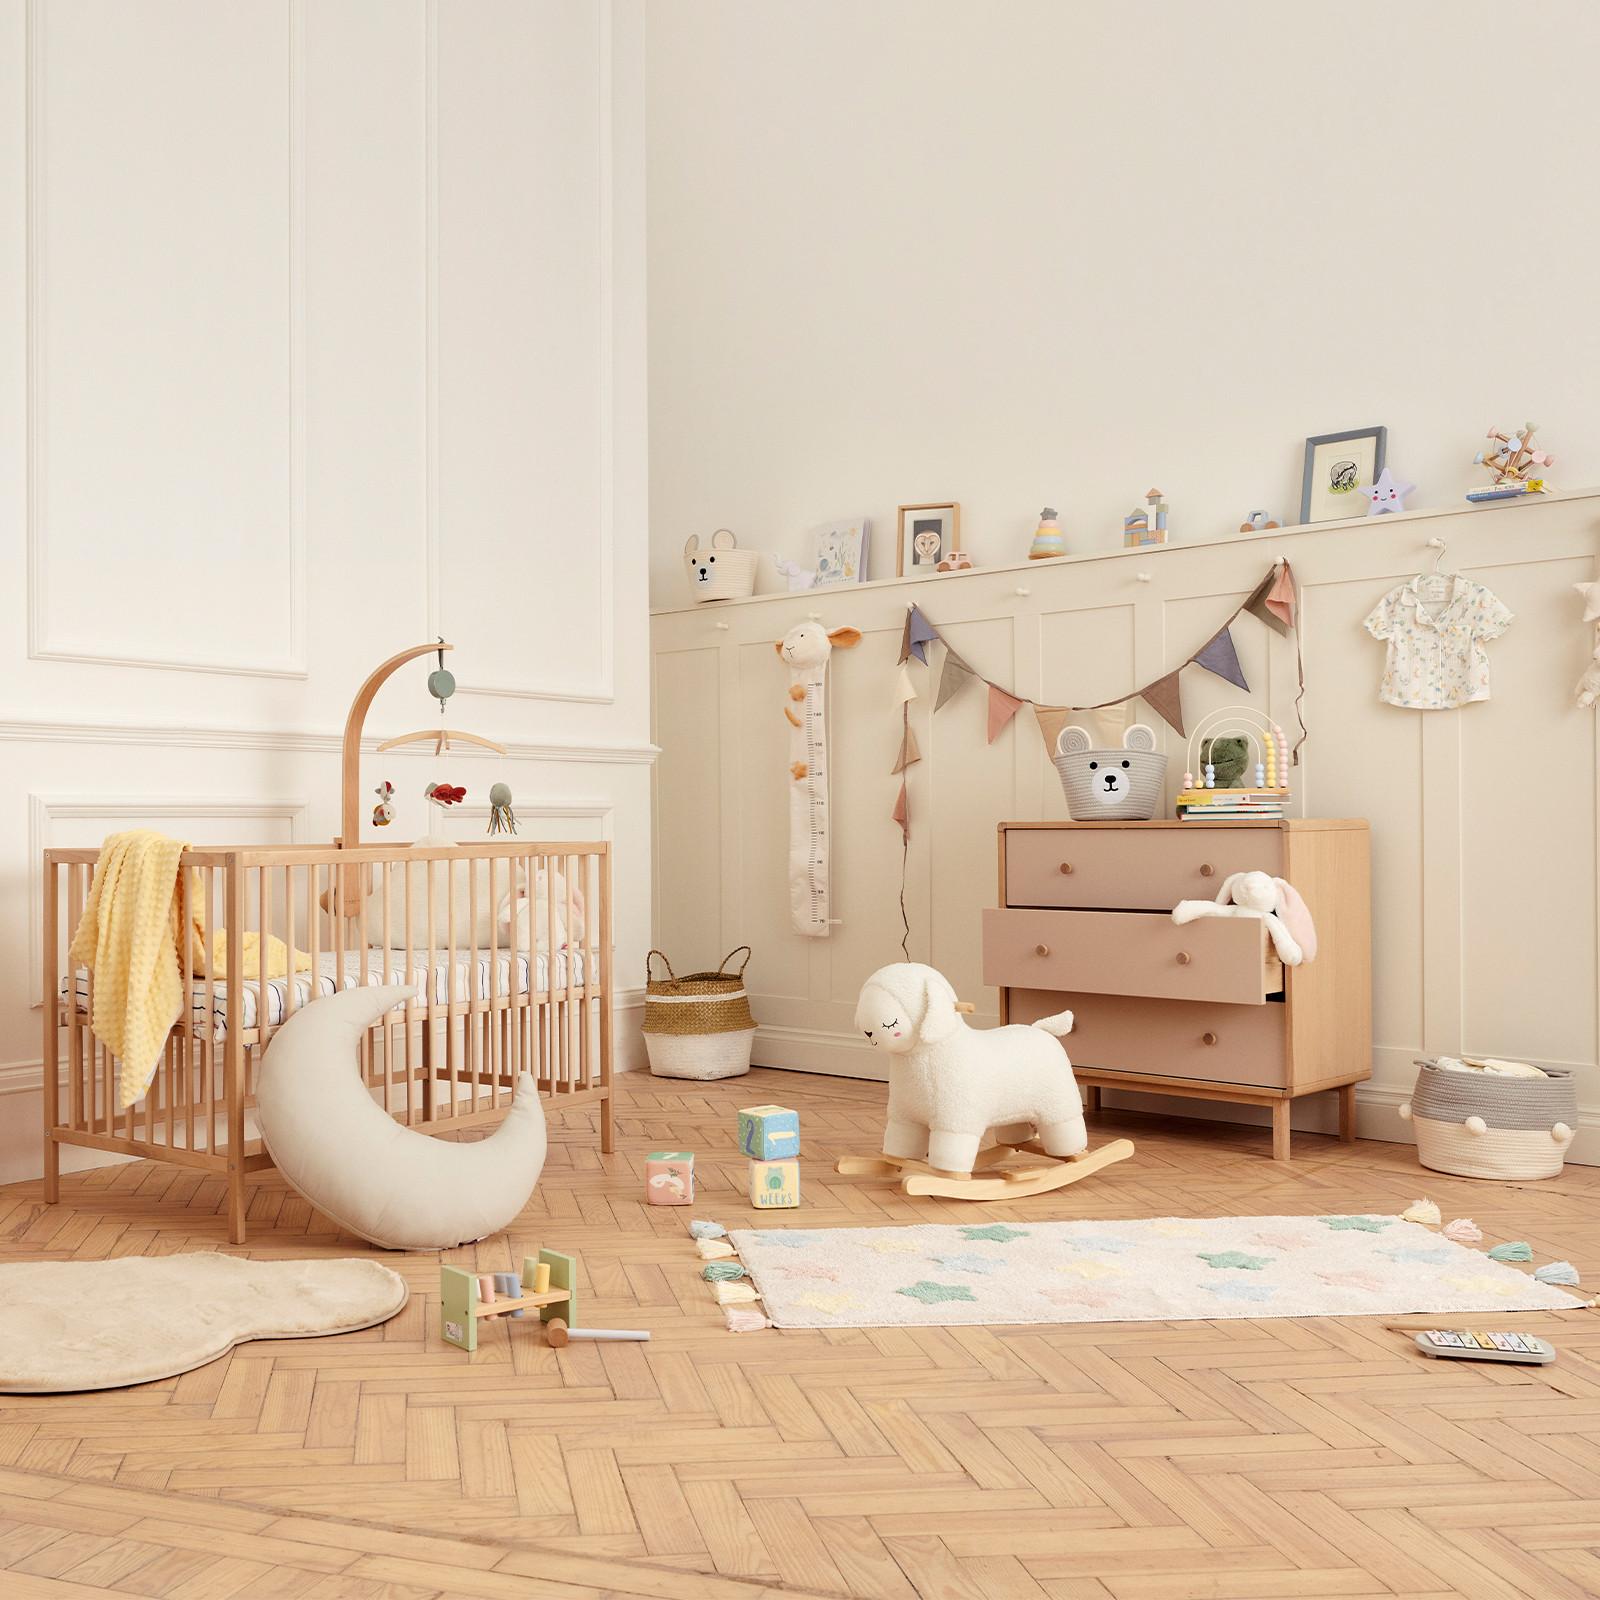 Nursery set up, showing wooden cot, drawers, rugs, toys and storage baskets